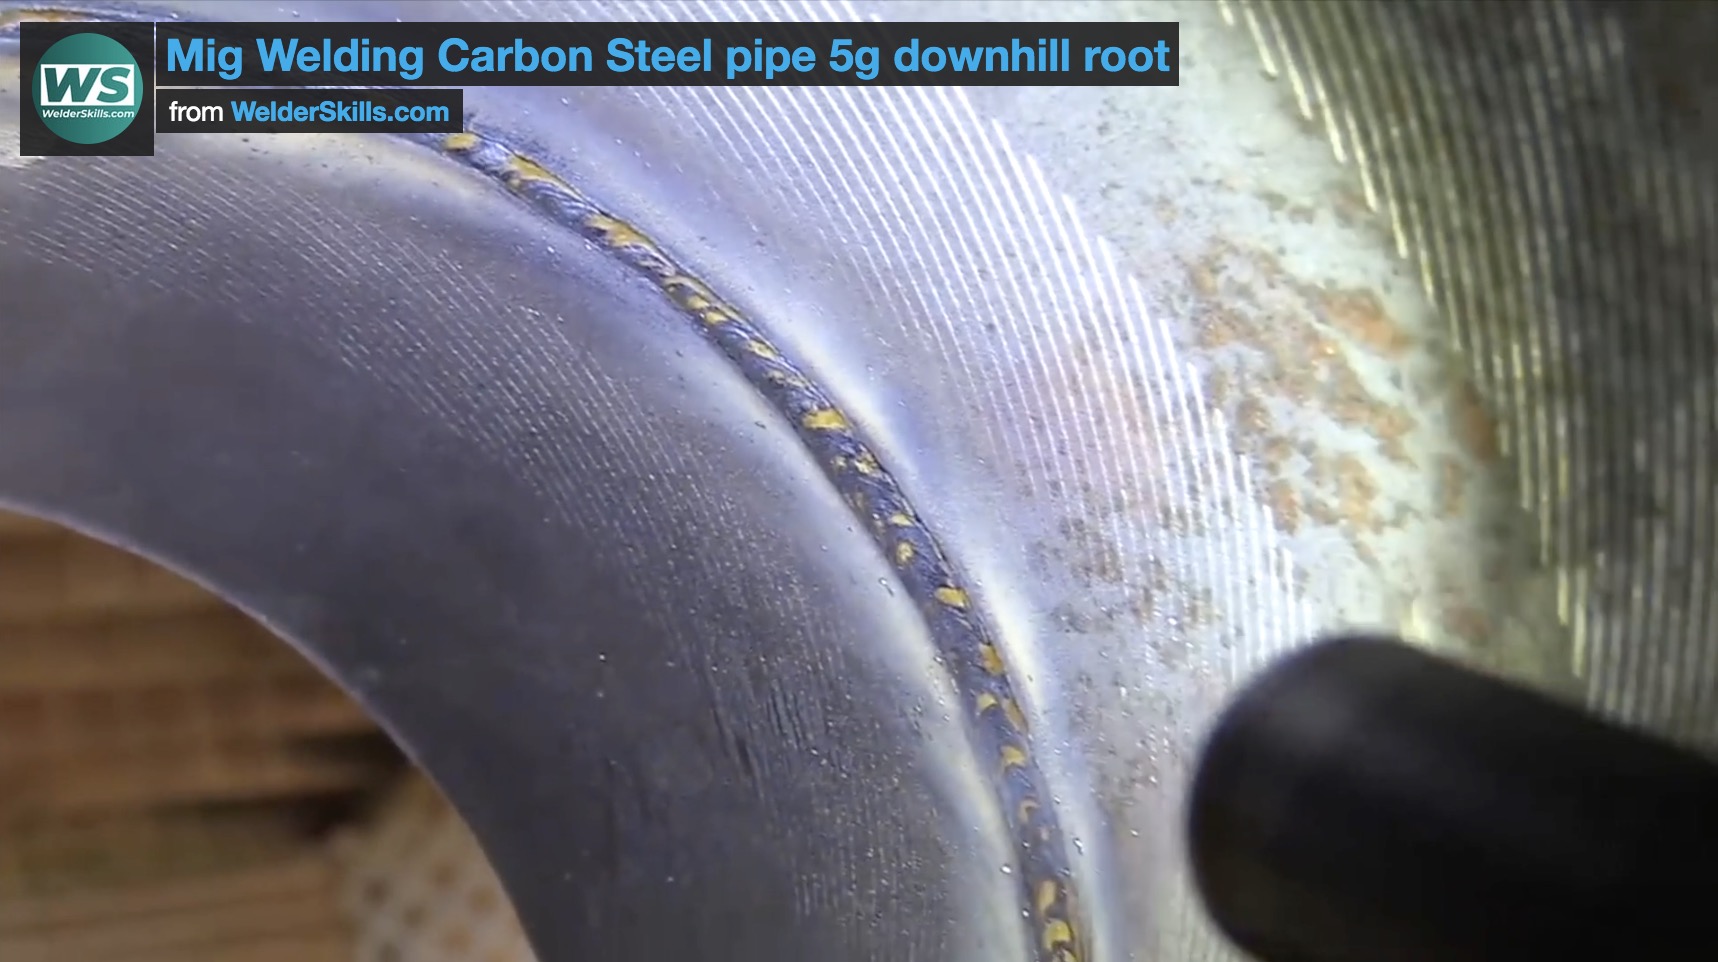 mig welding pipe downhill root